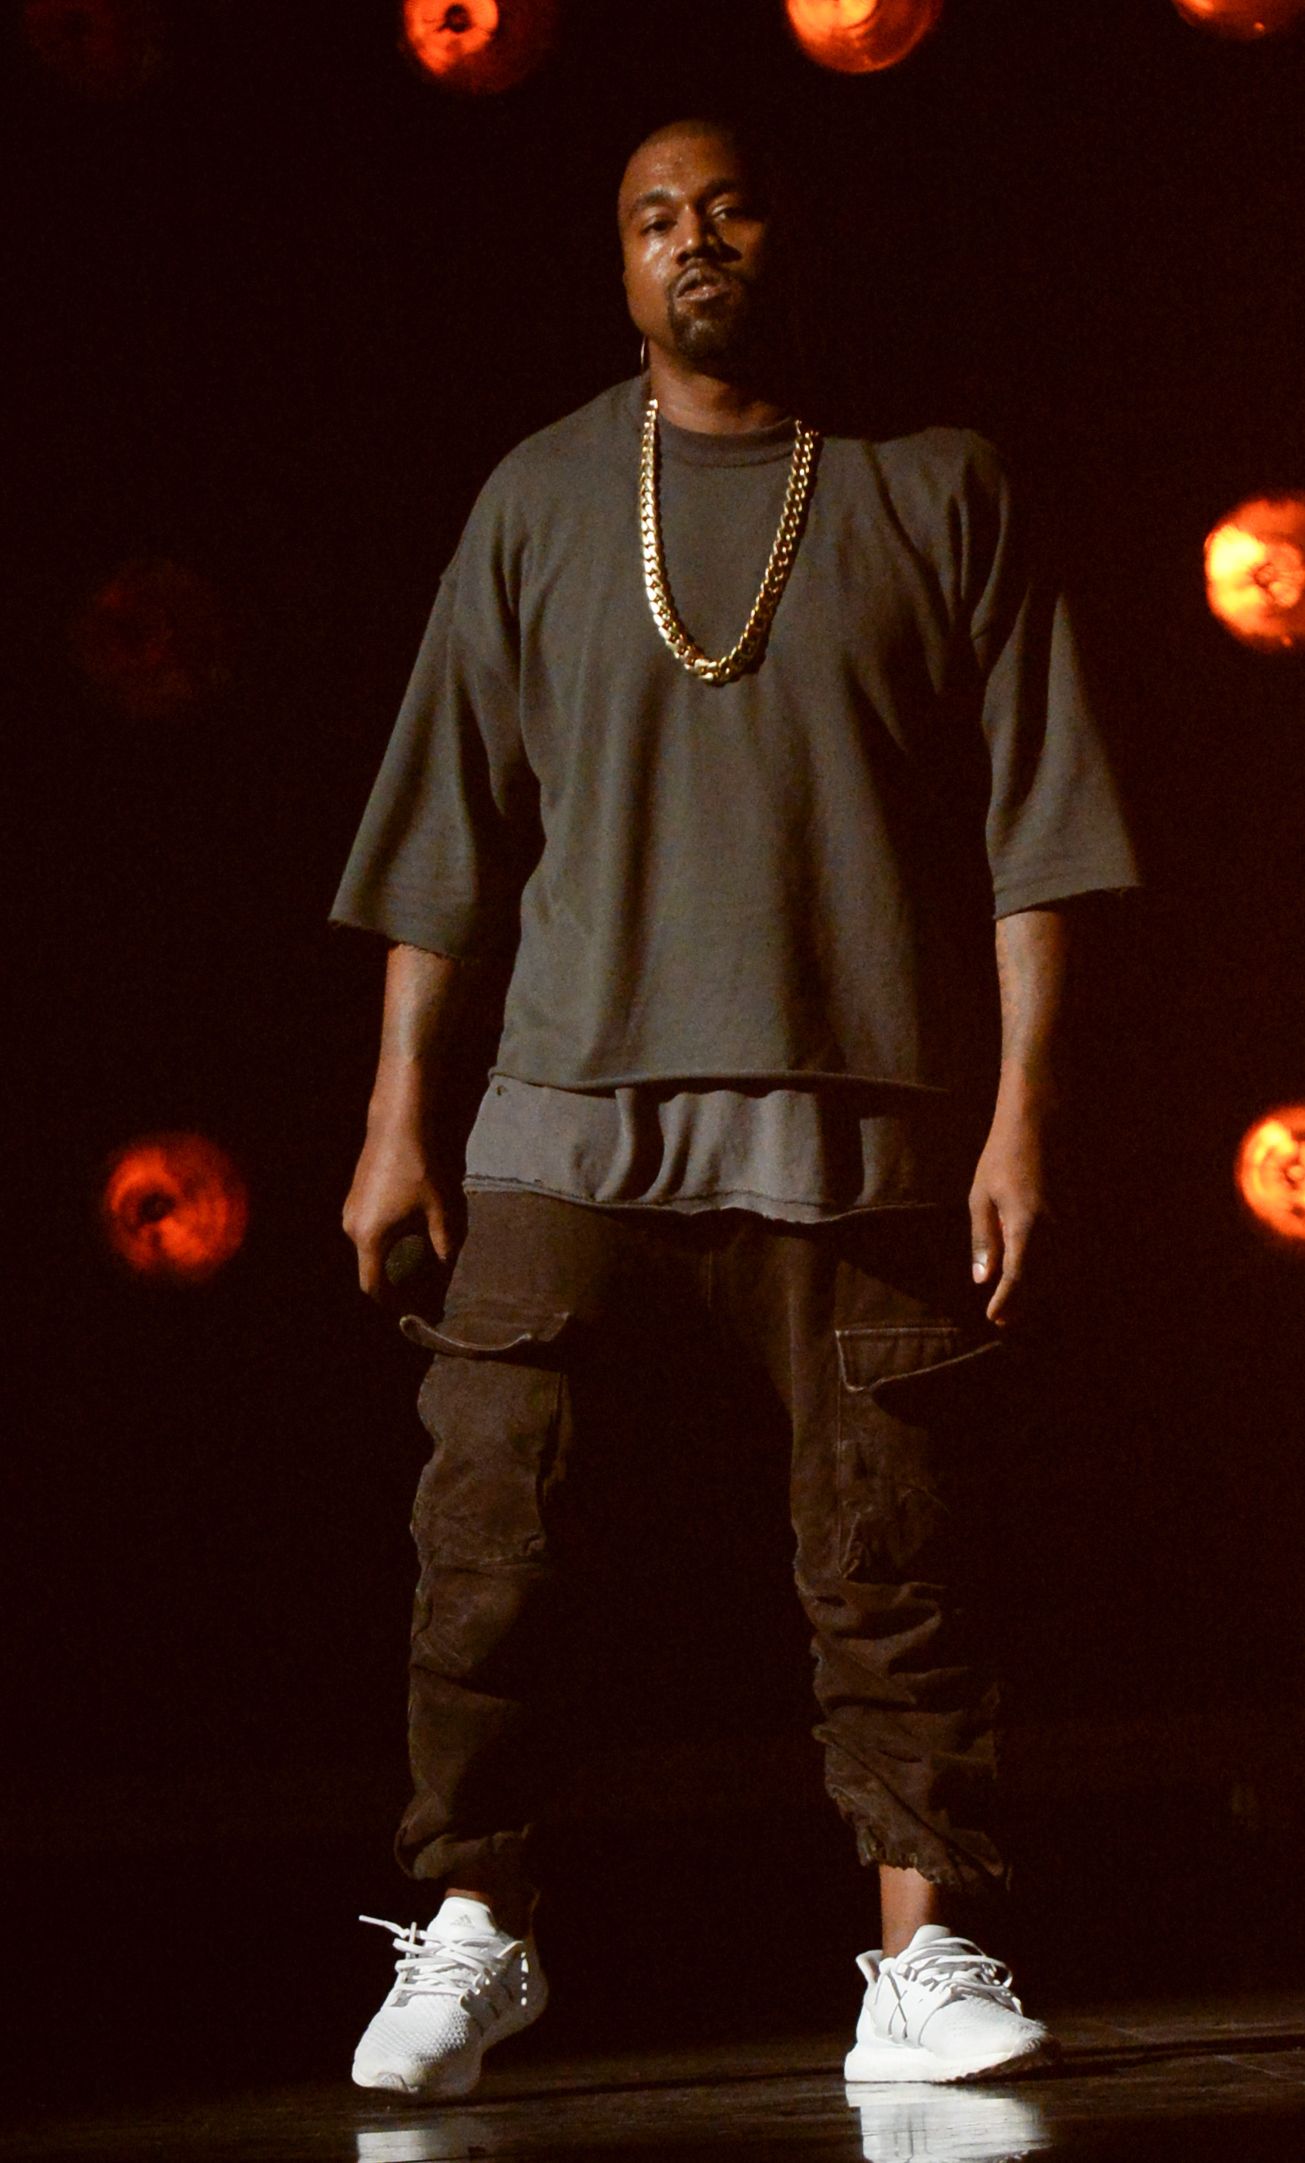 Feeling sorry for Kanye West and his $53m debt? Now you can donate ...